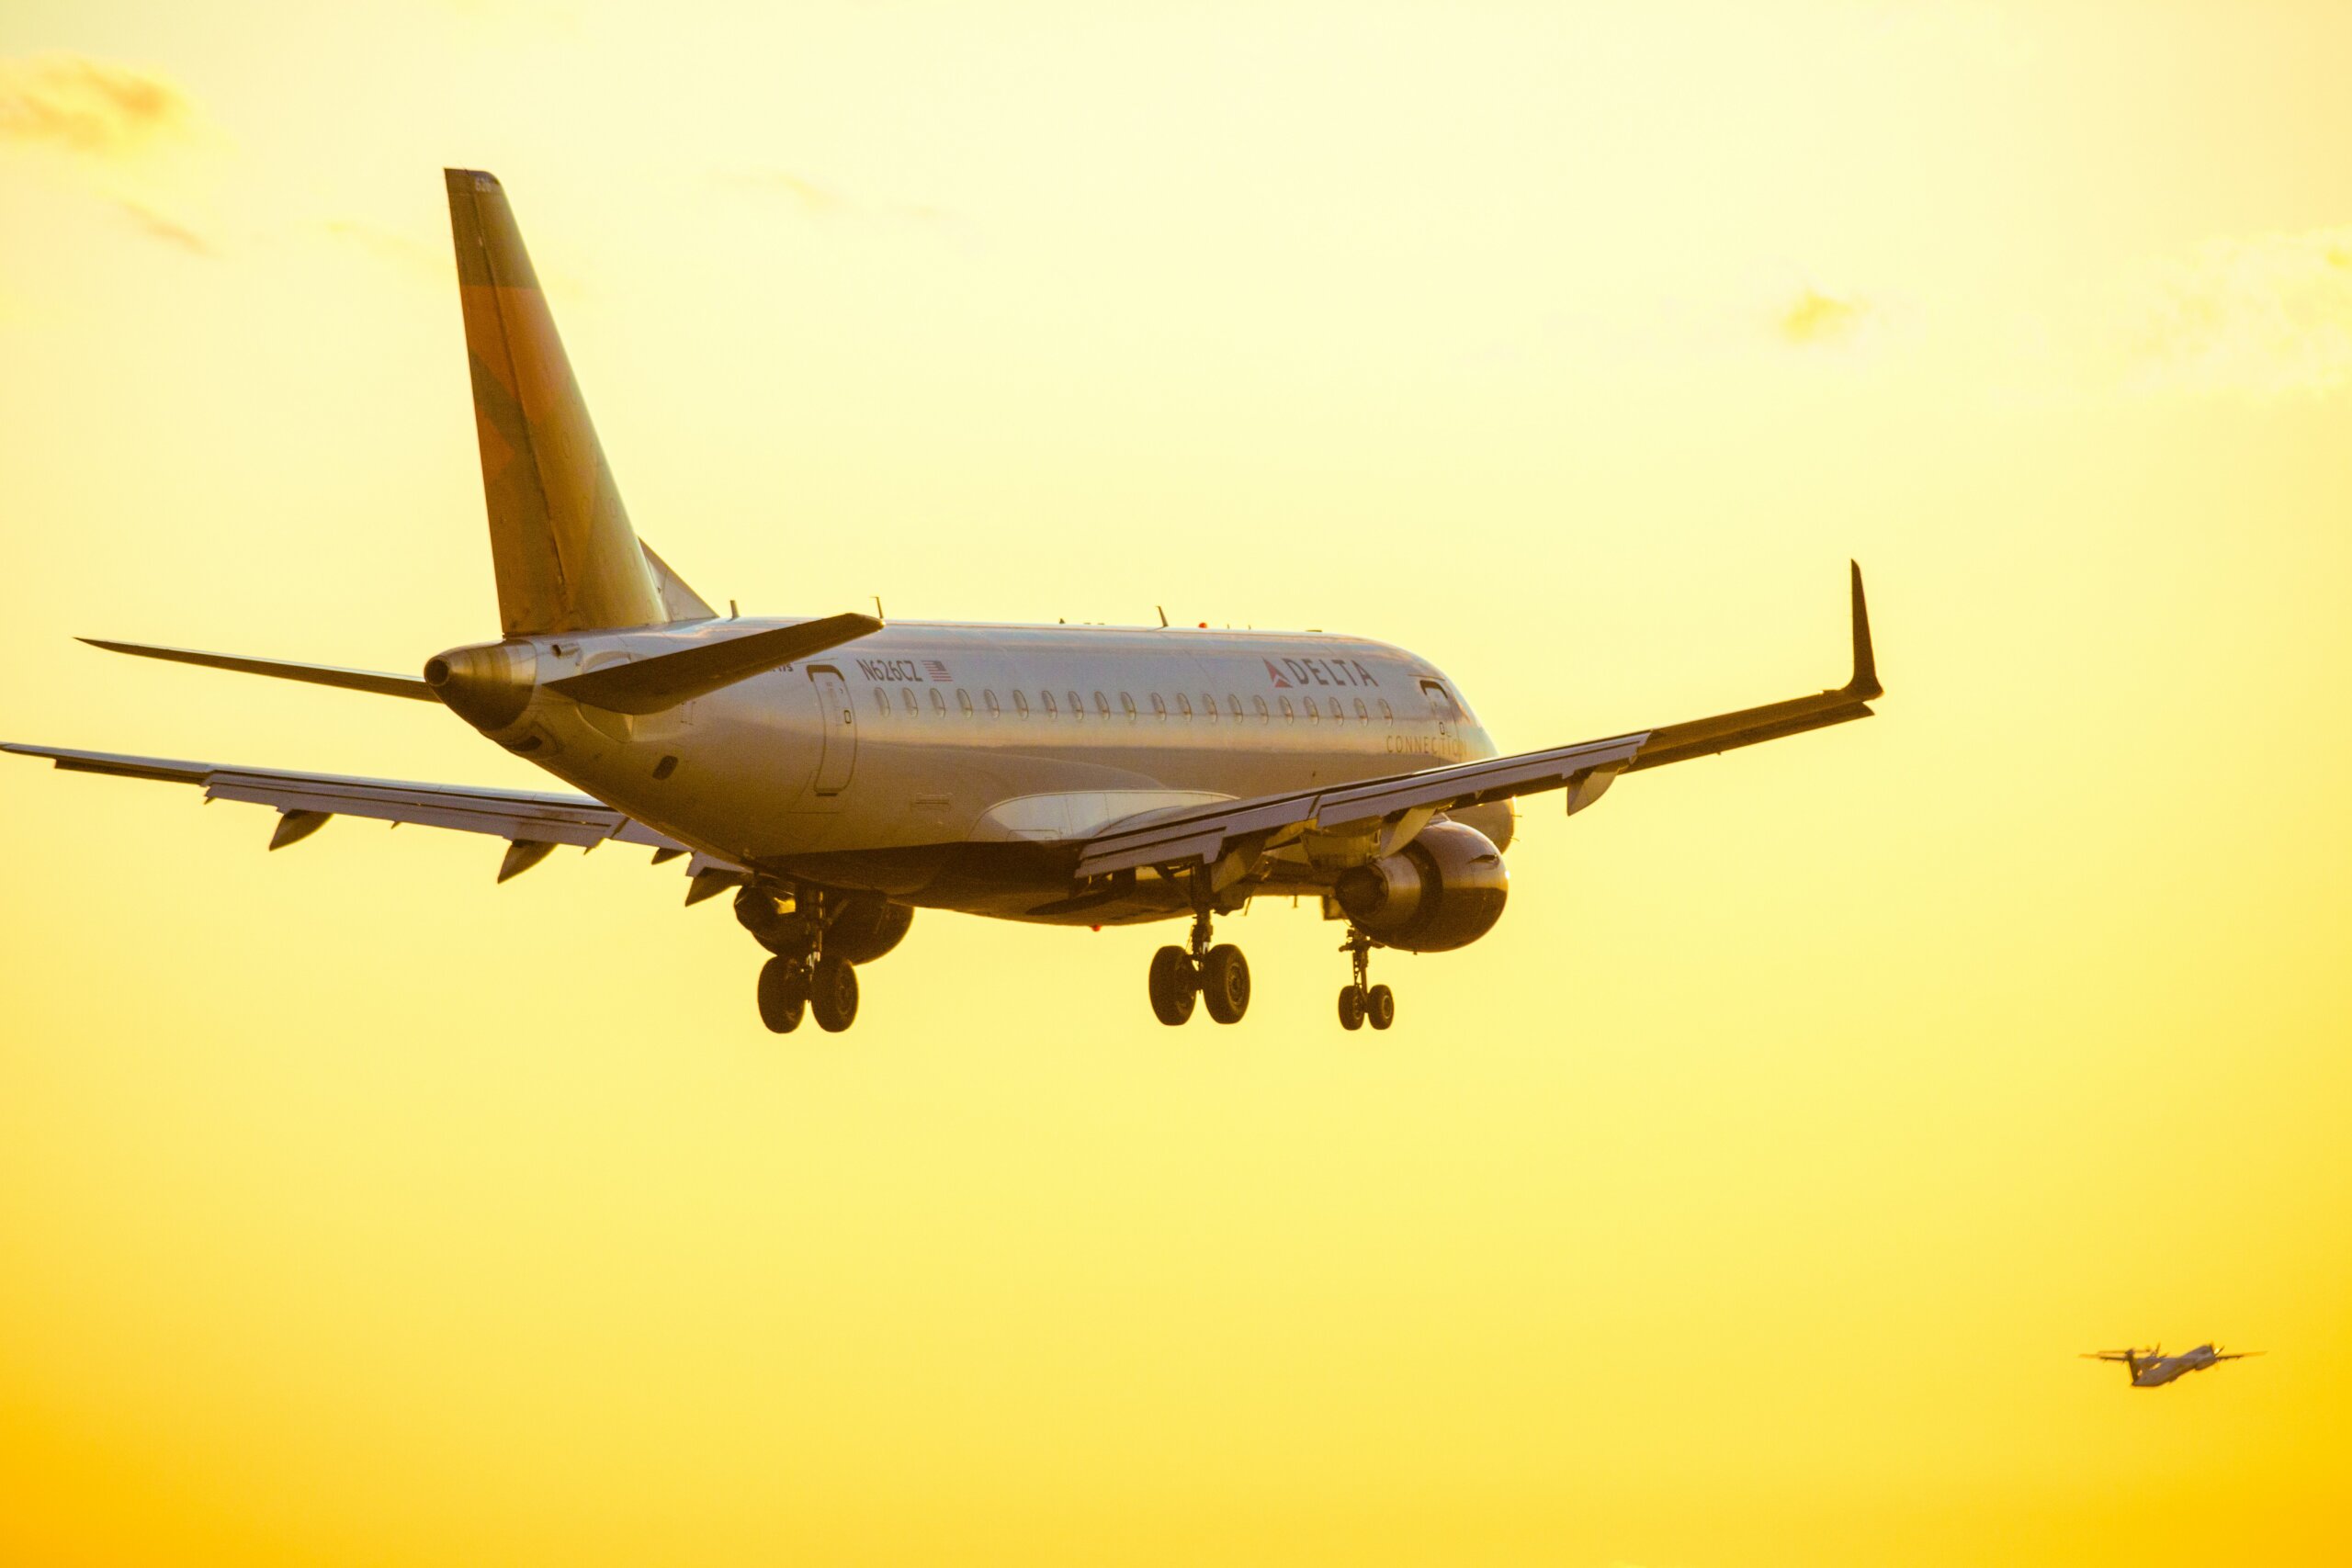 FAA Reauthorization Bill to Impact Airline Safety and Travel